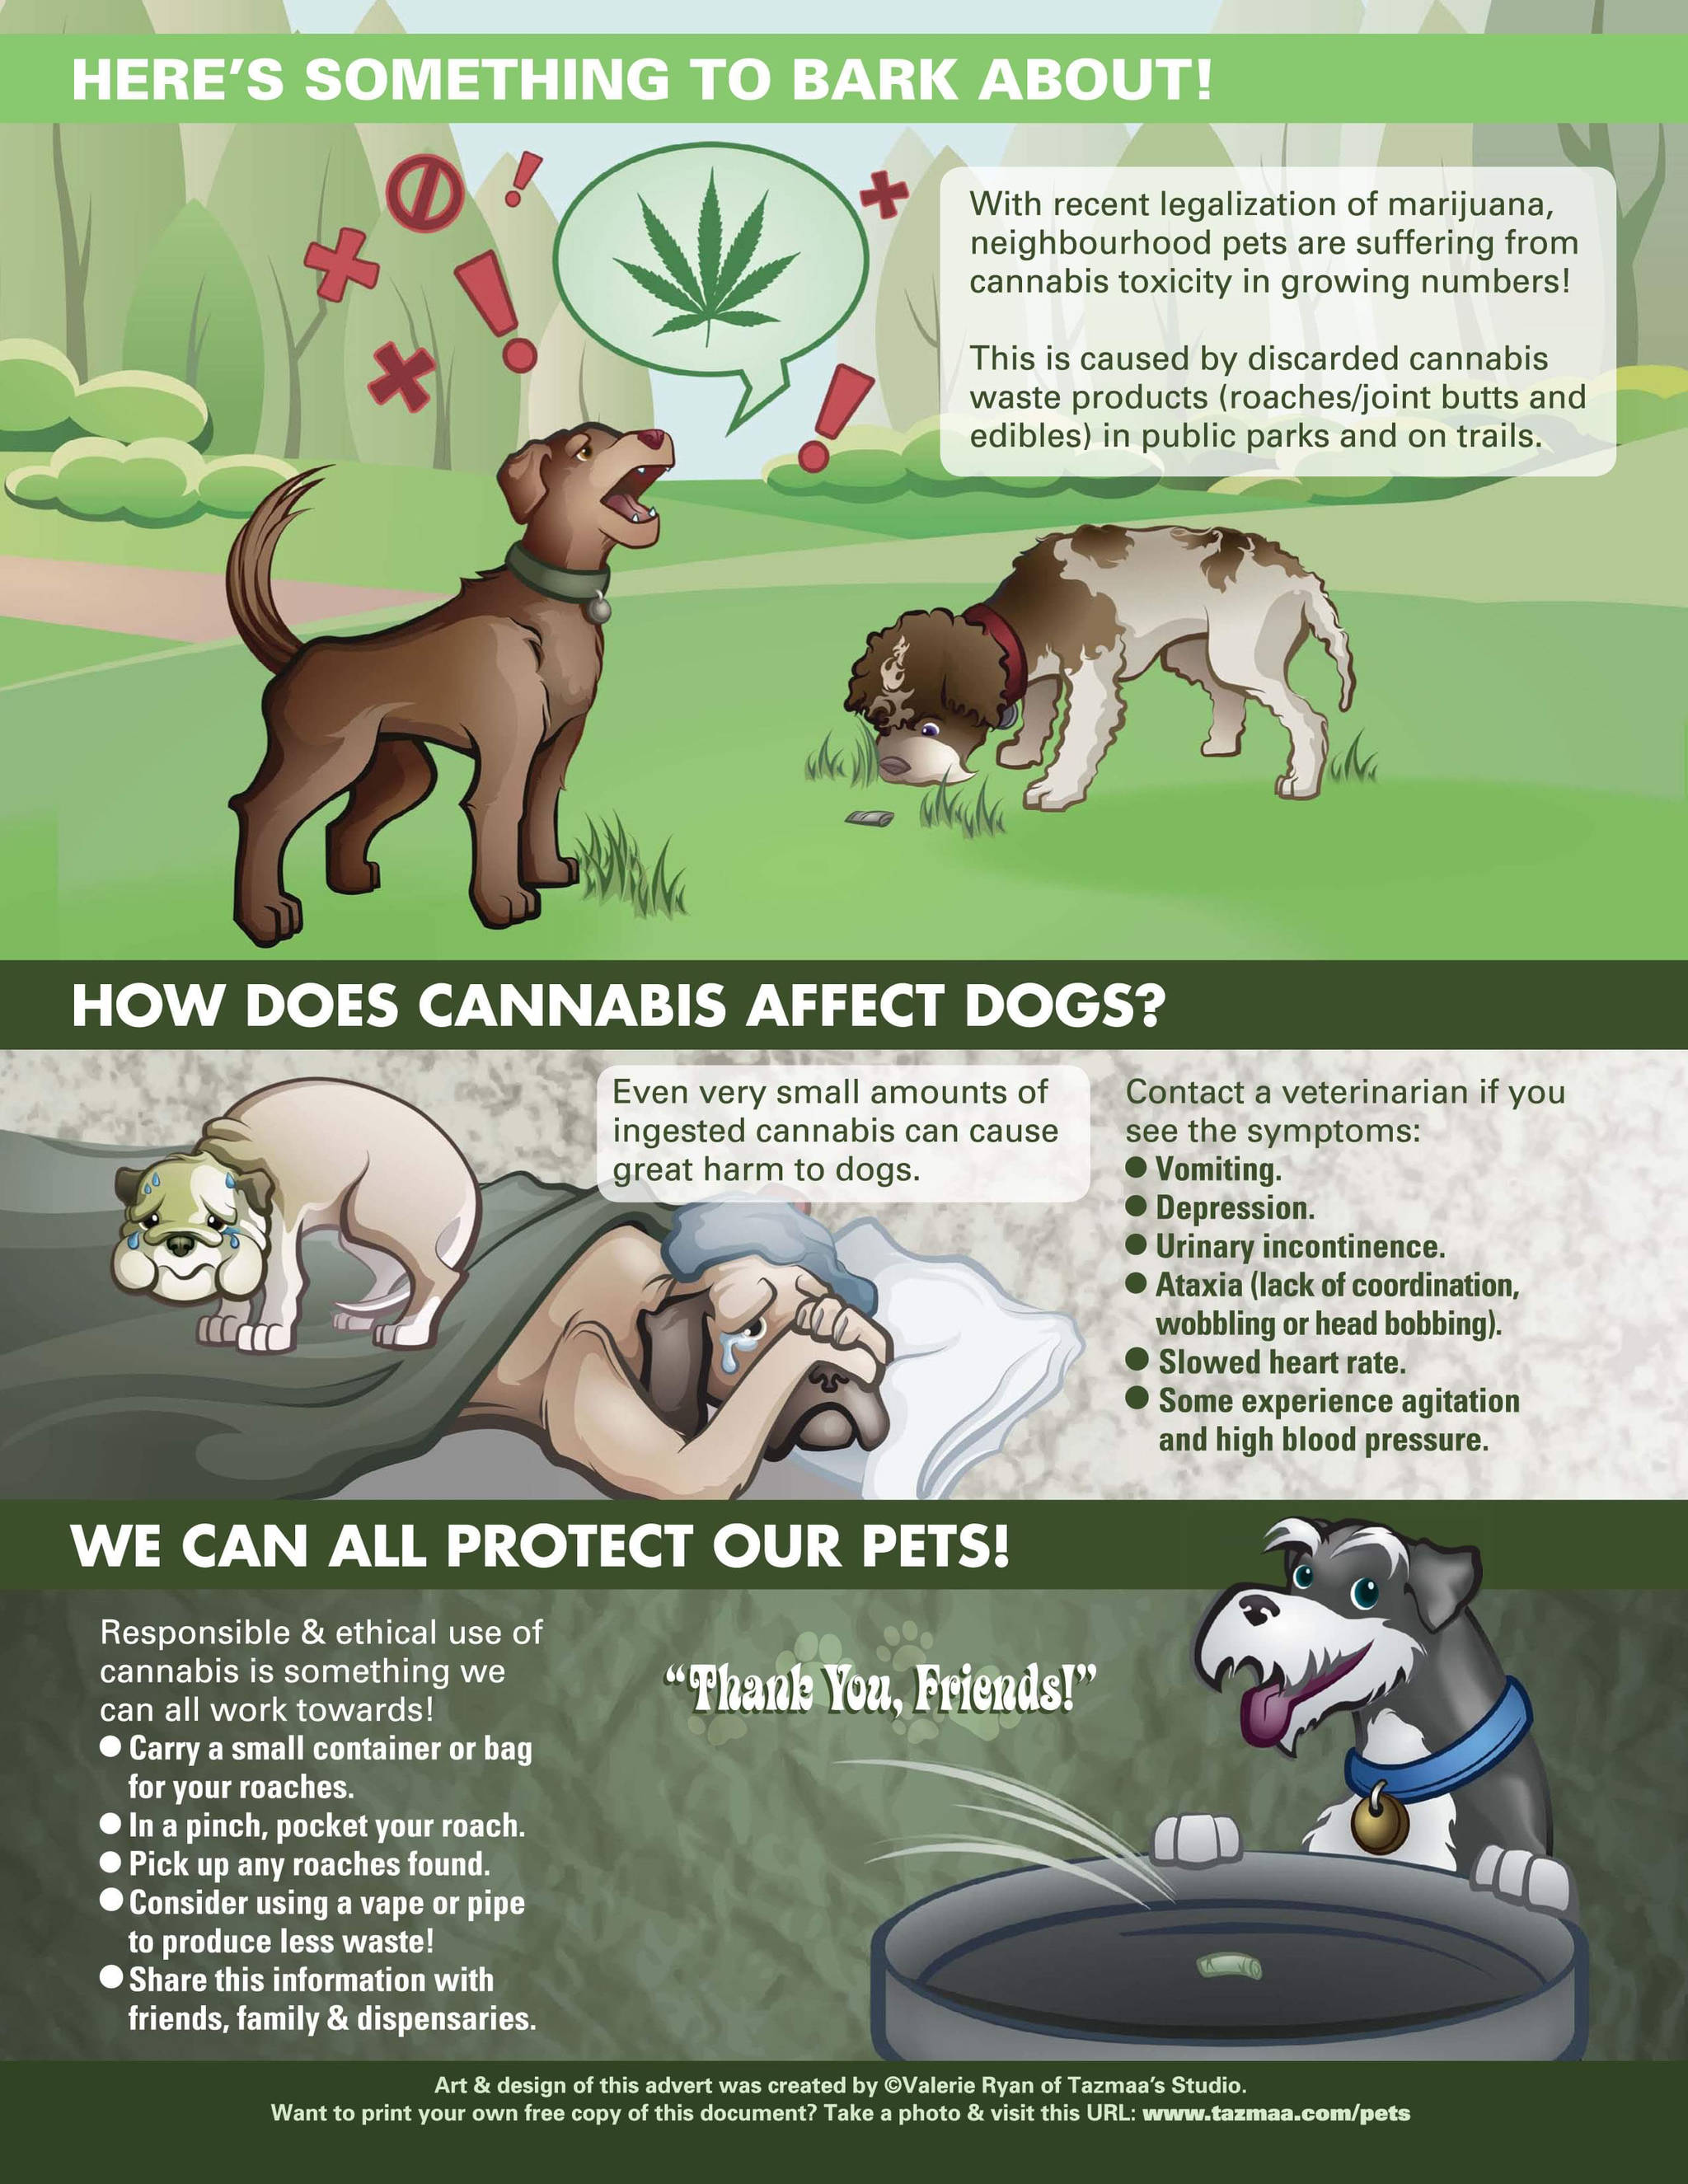 24675825_web1_210329-LAT-Dog-sicked-by-Cannabis-poster_1